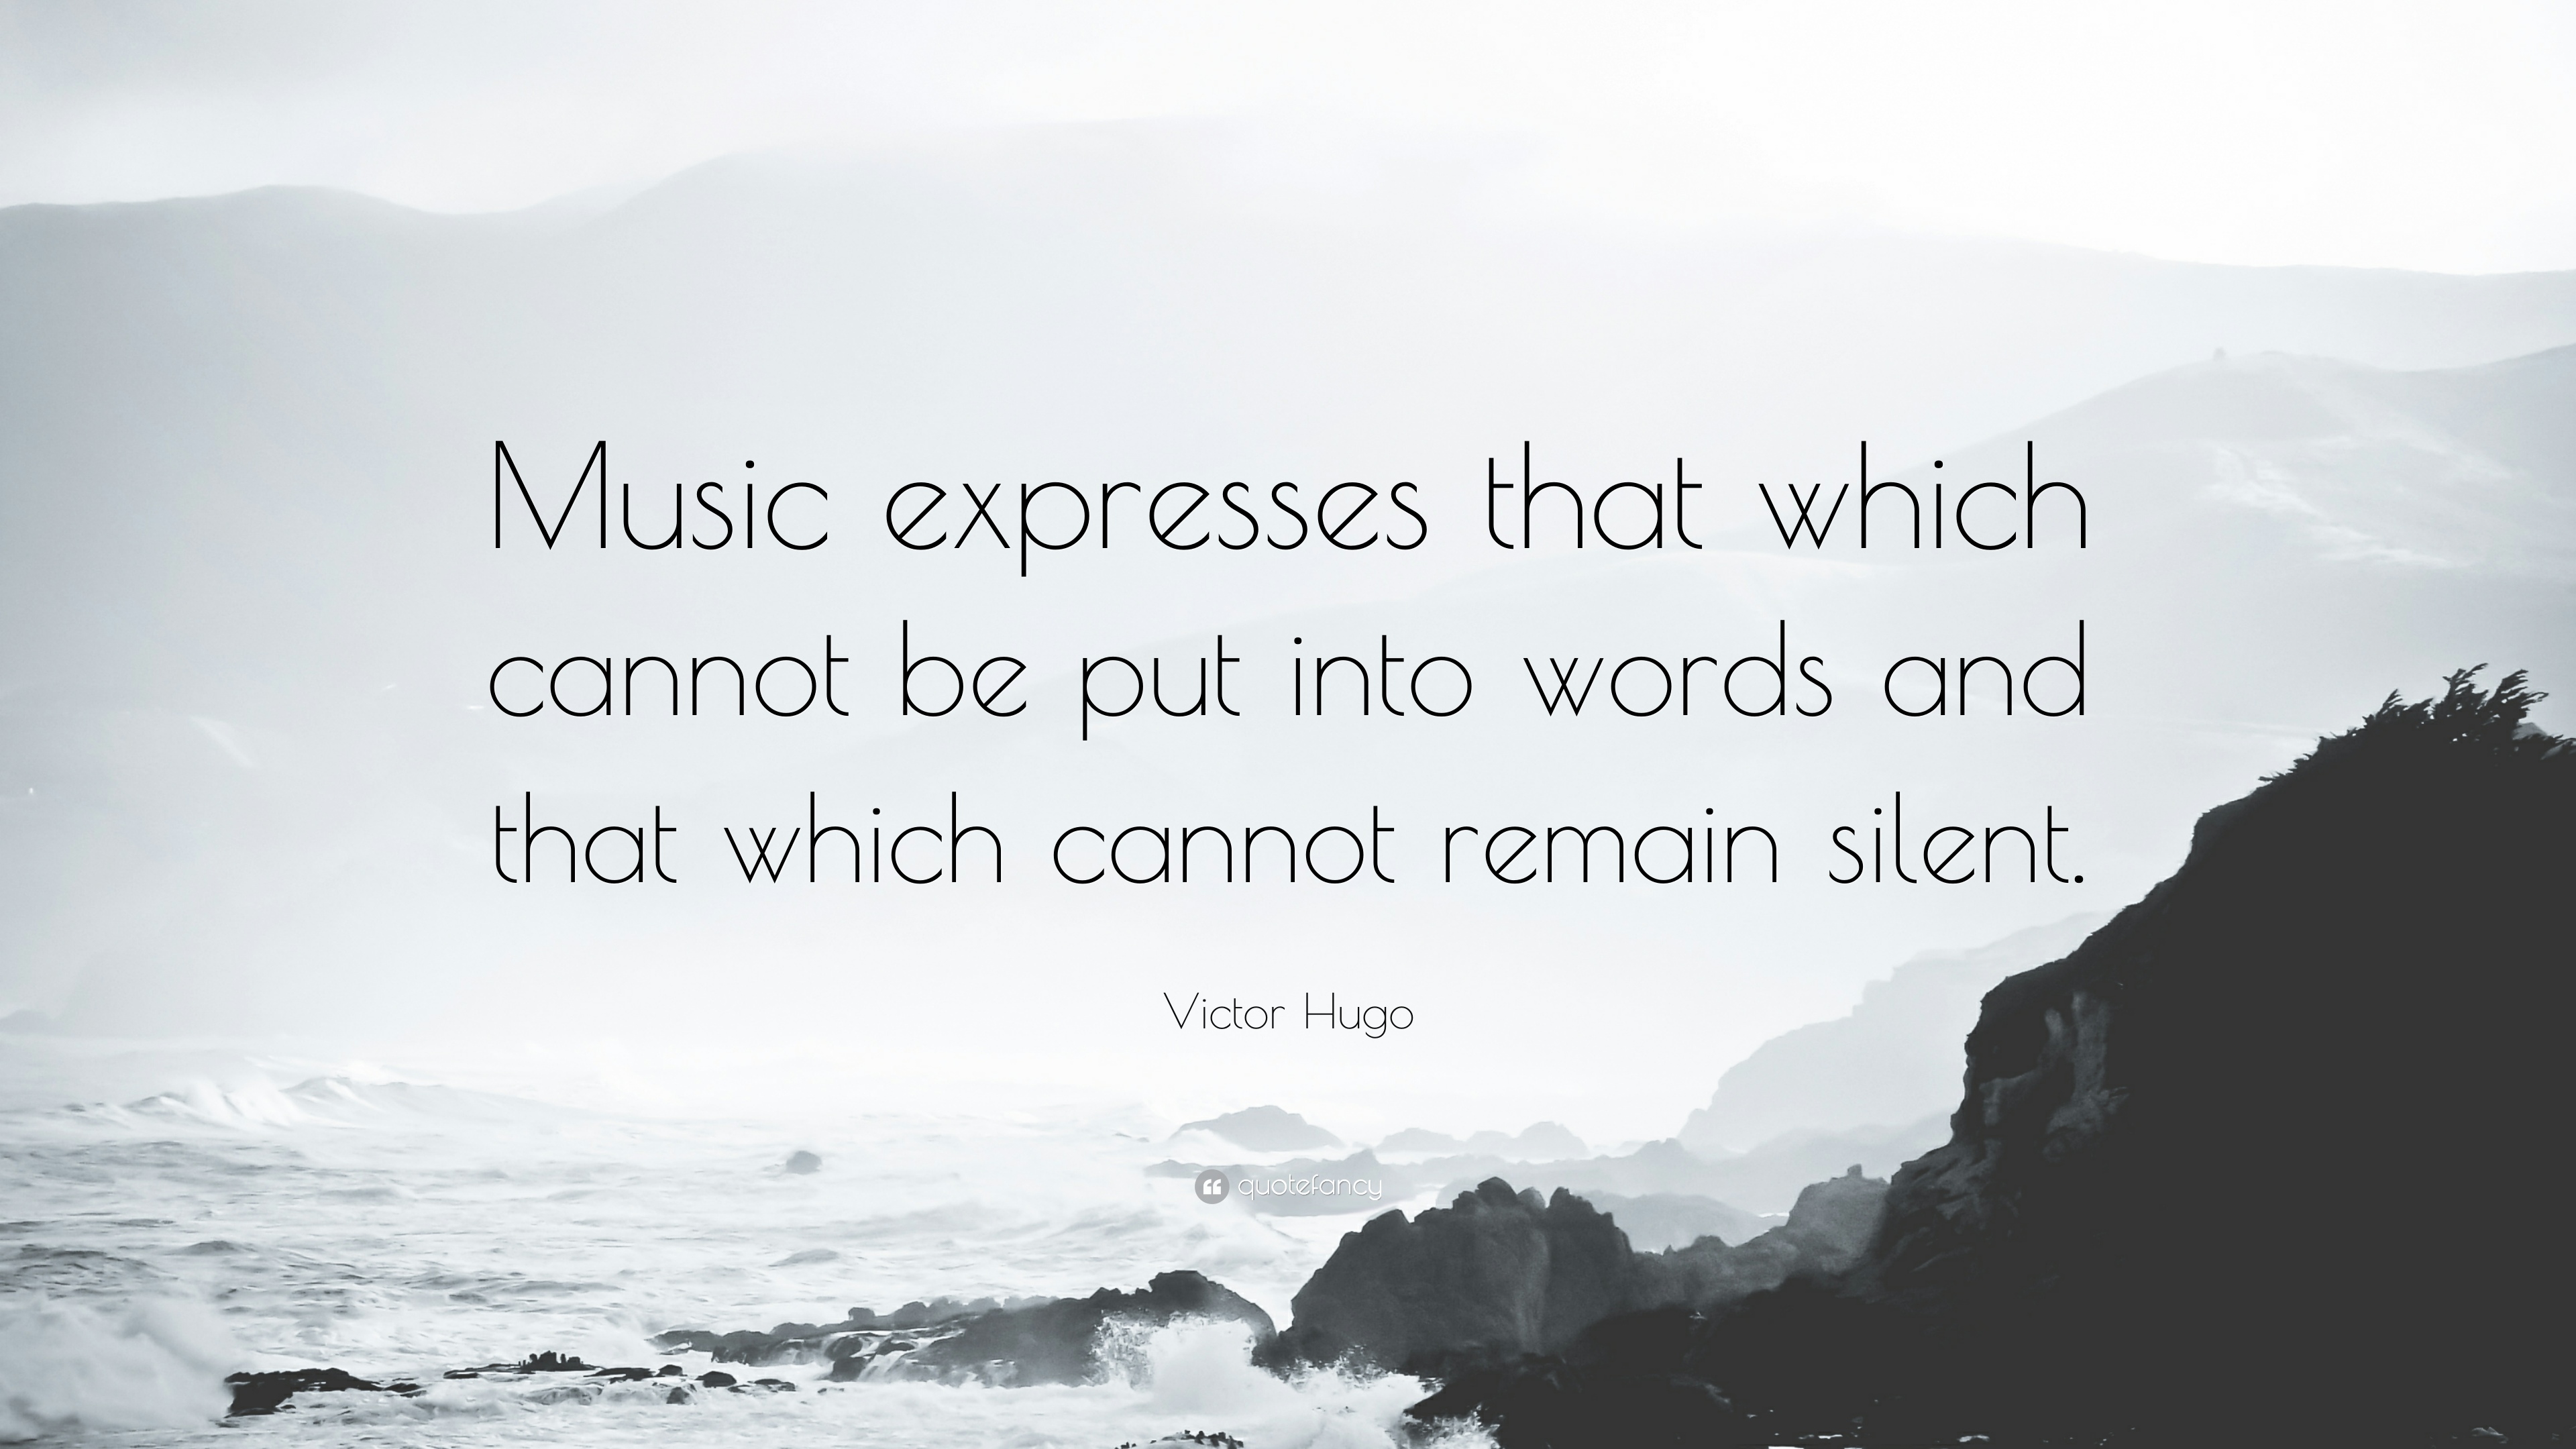 Music expresses that which cannot be put into words and that which cannot remain silent. Victor Hugo